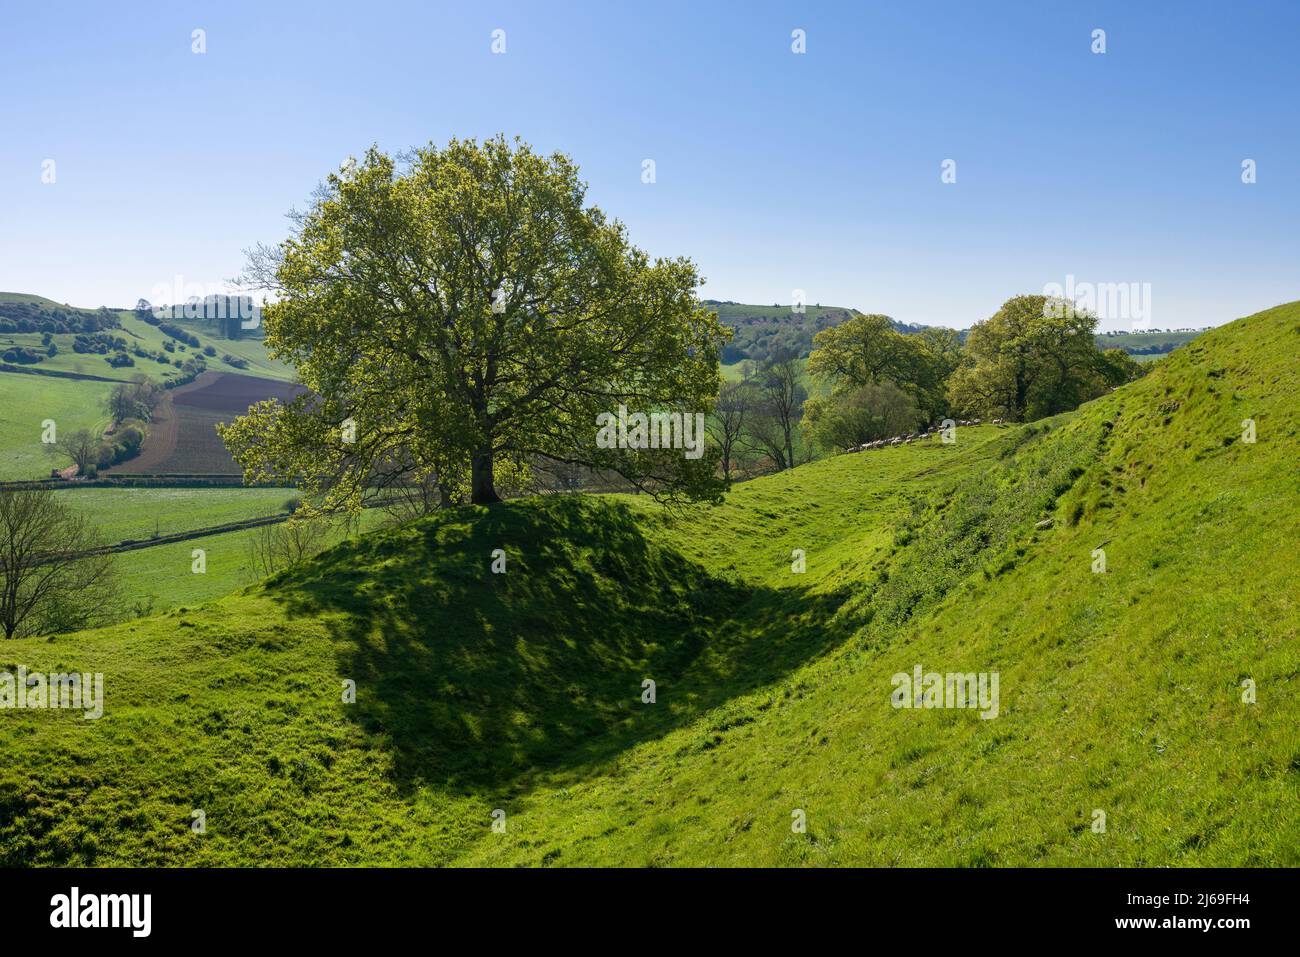 The ramparts of Cadbury Castle, a bronze and iron age hillfort known locally as King Arthur’s Camelot. South Cadbury, Somerset, England. Stock Photo